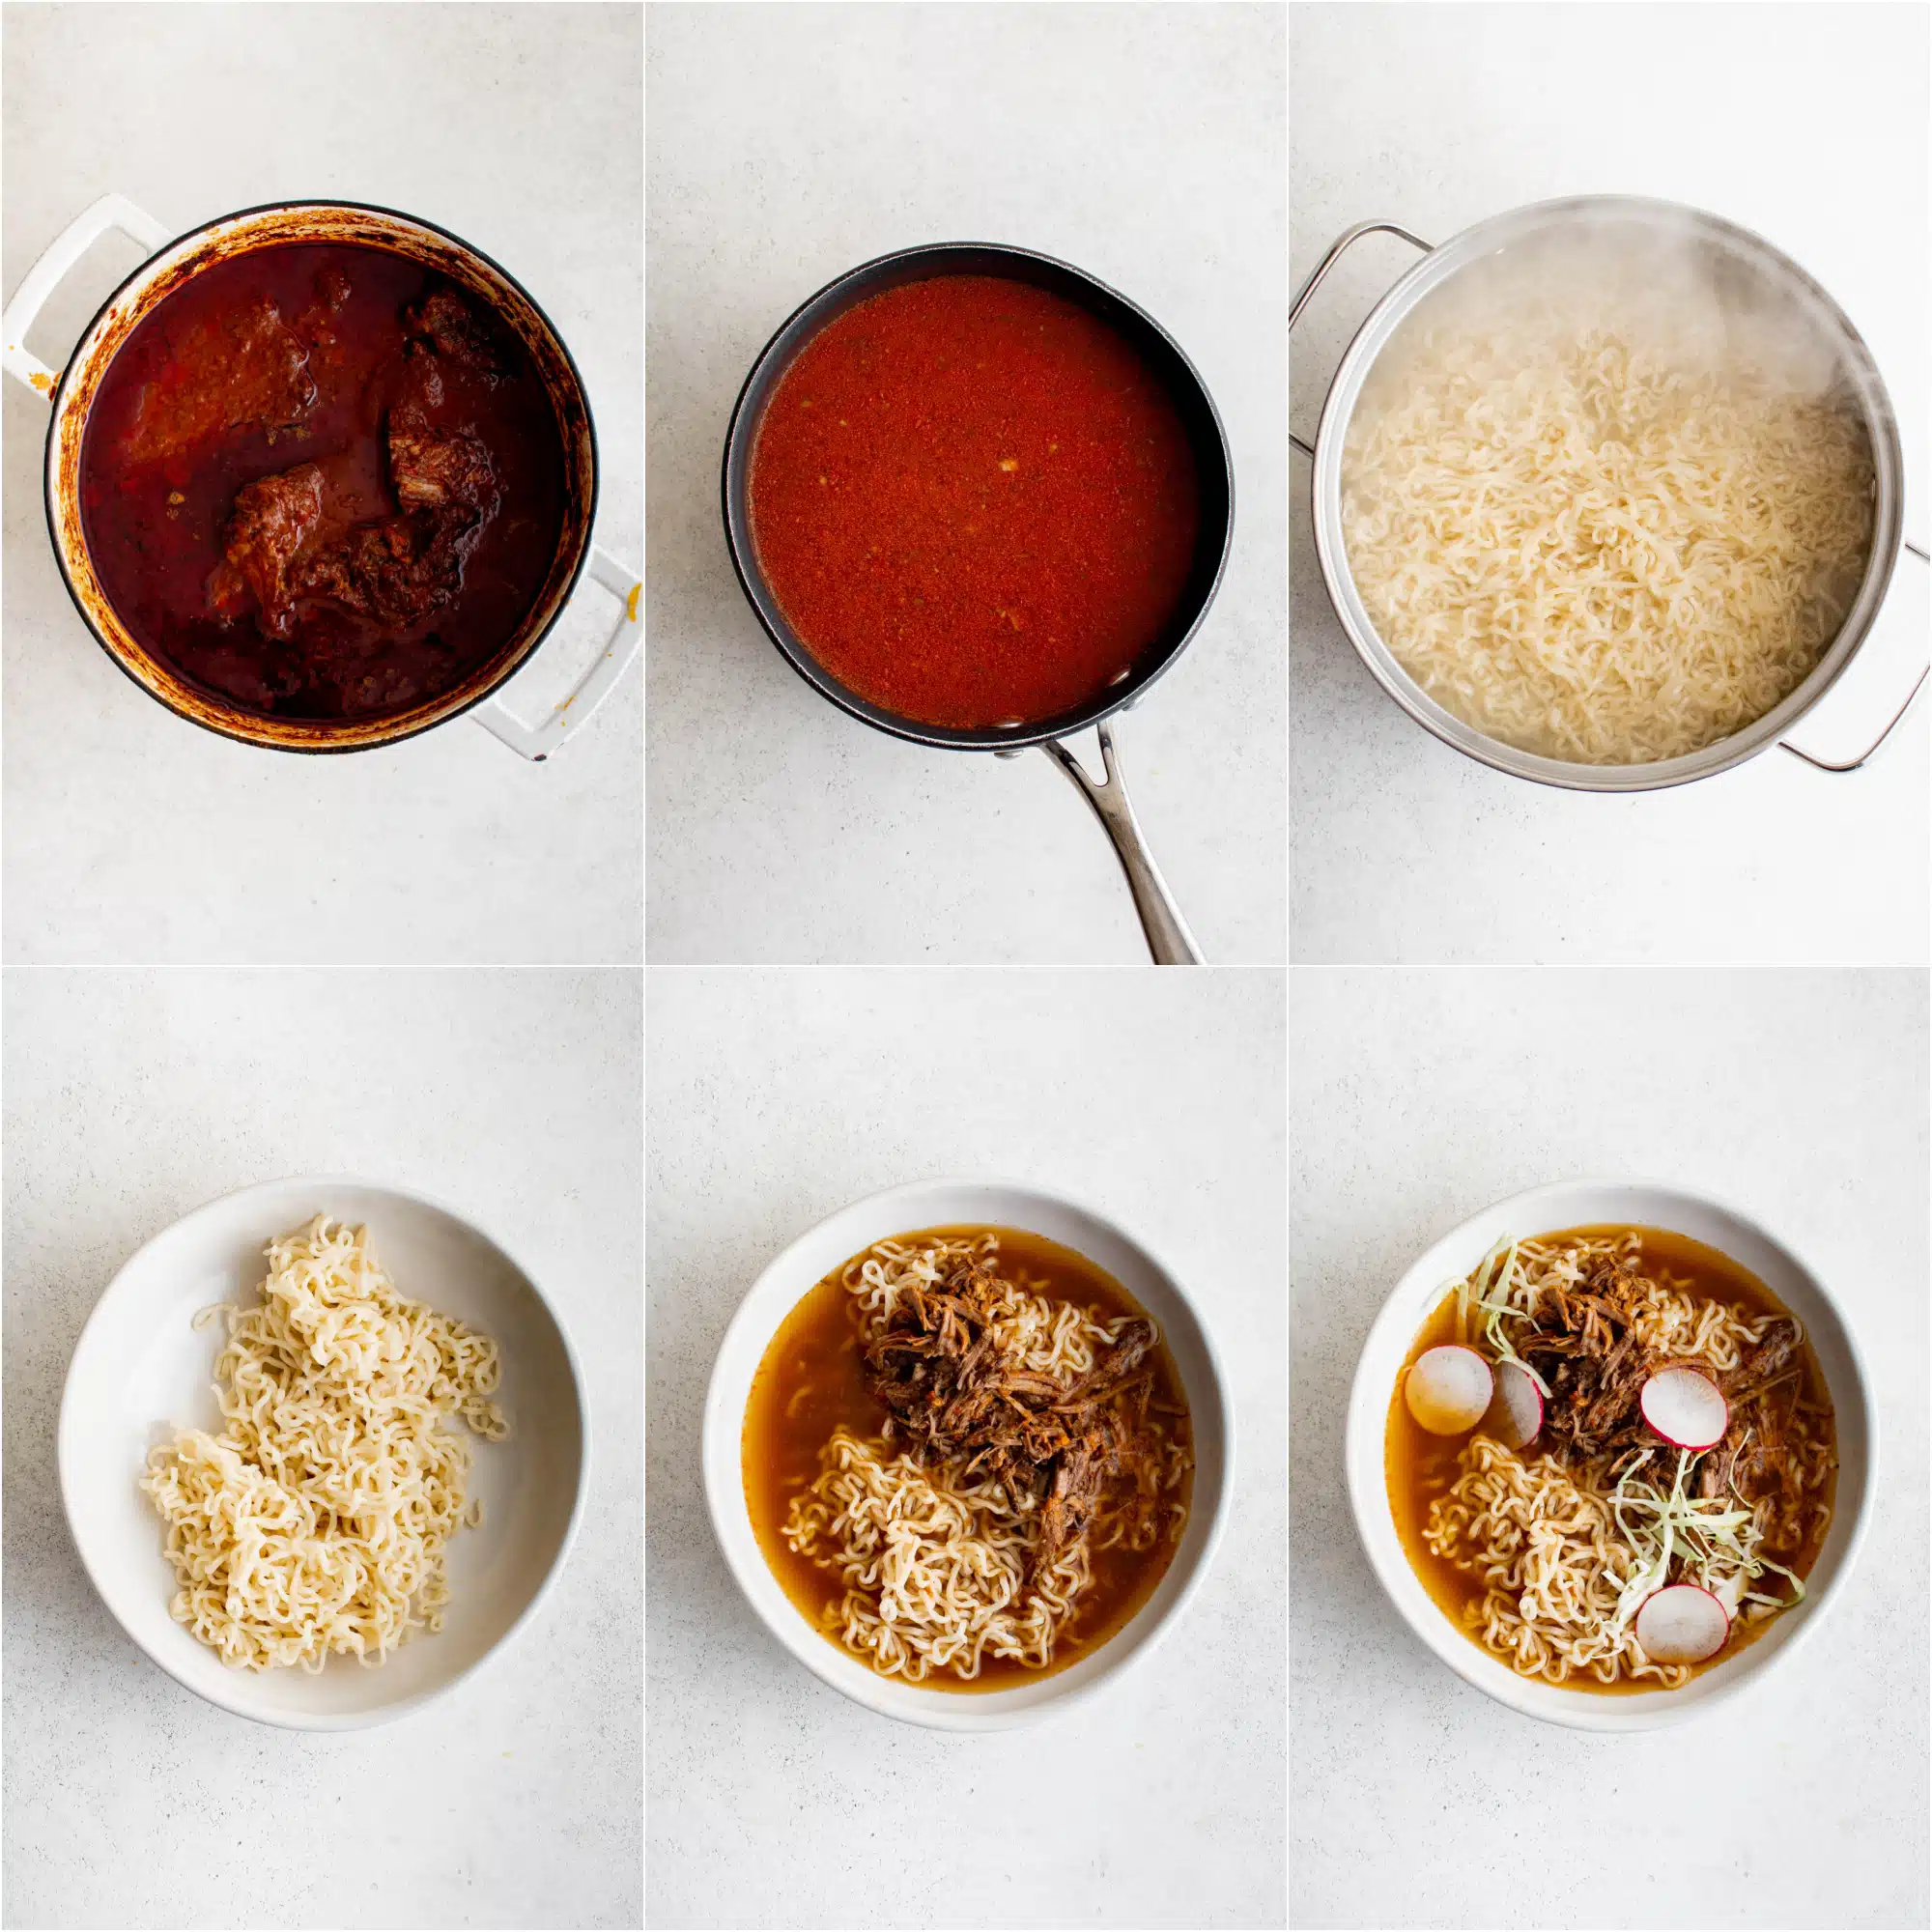 Collage of six images illustrating preparing a bowl of birria ramen using homemade birria broth, cooked ramen noodles, shredded beef, cabbage, and radish.